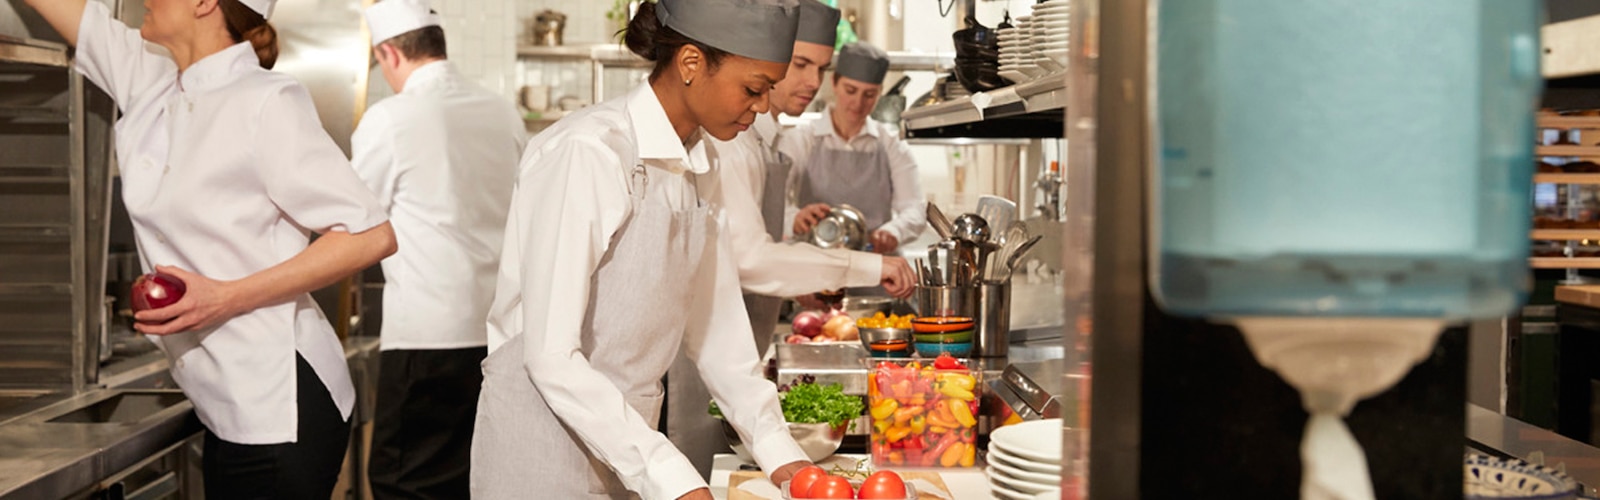 Women and med in a restaurant kitchen preparing meals